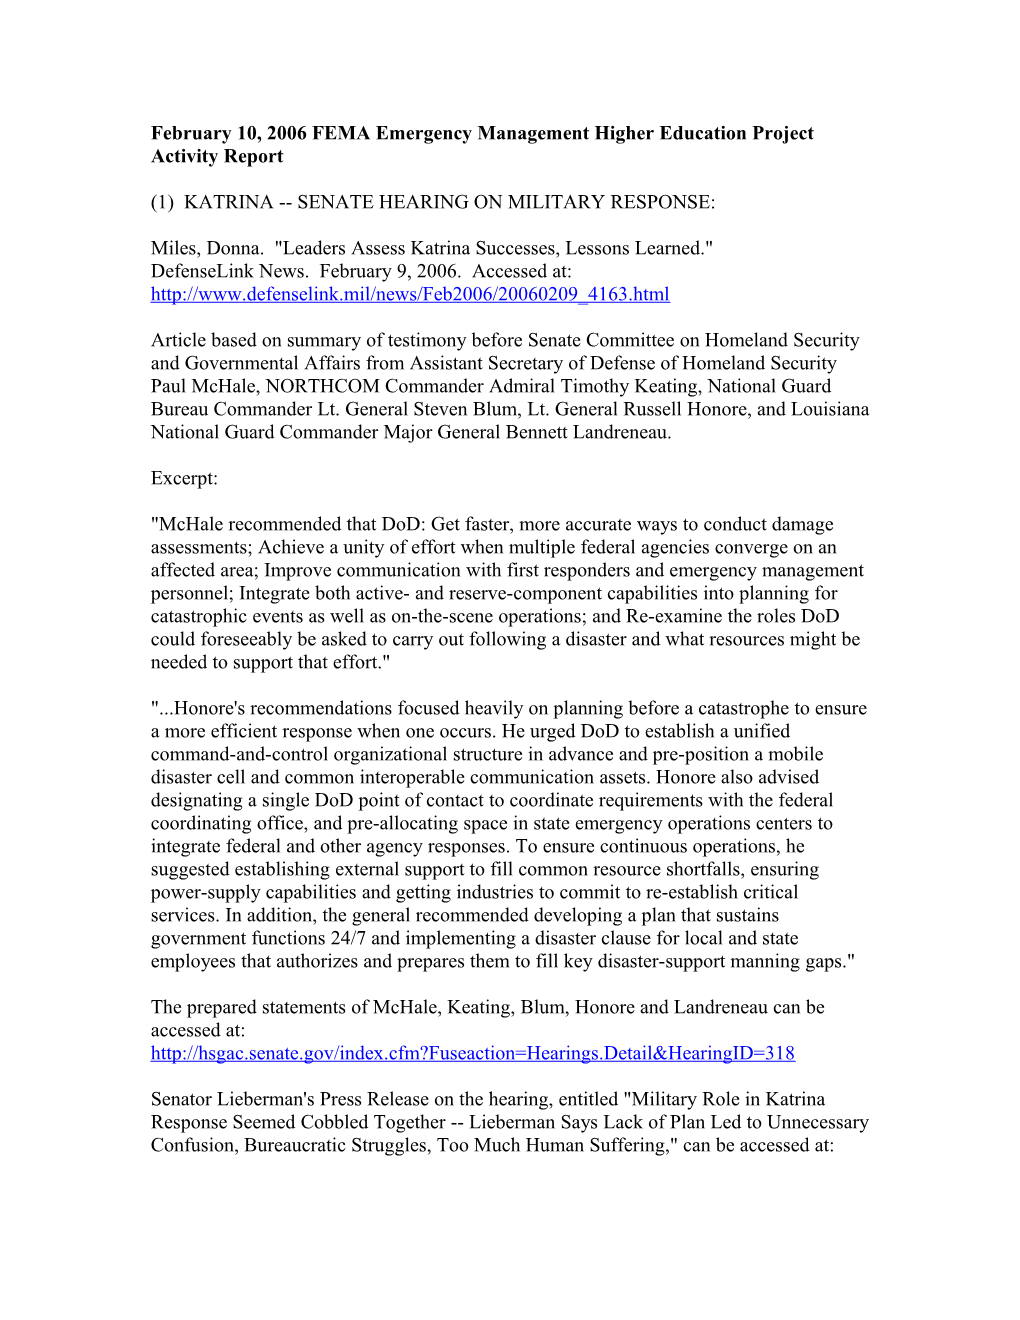 February 10, 2006 FEMA Emergency Management Higher Education Project Activity Report